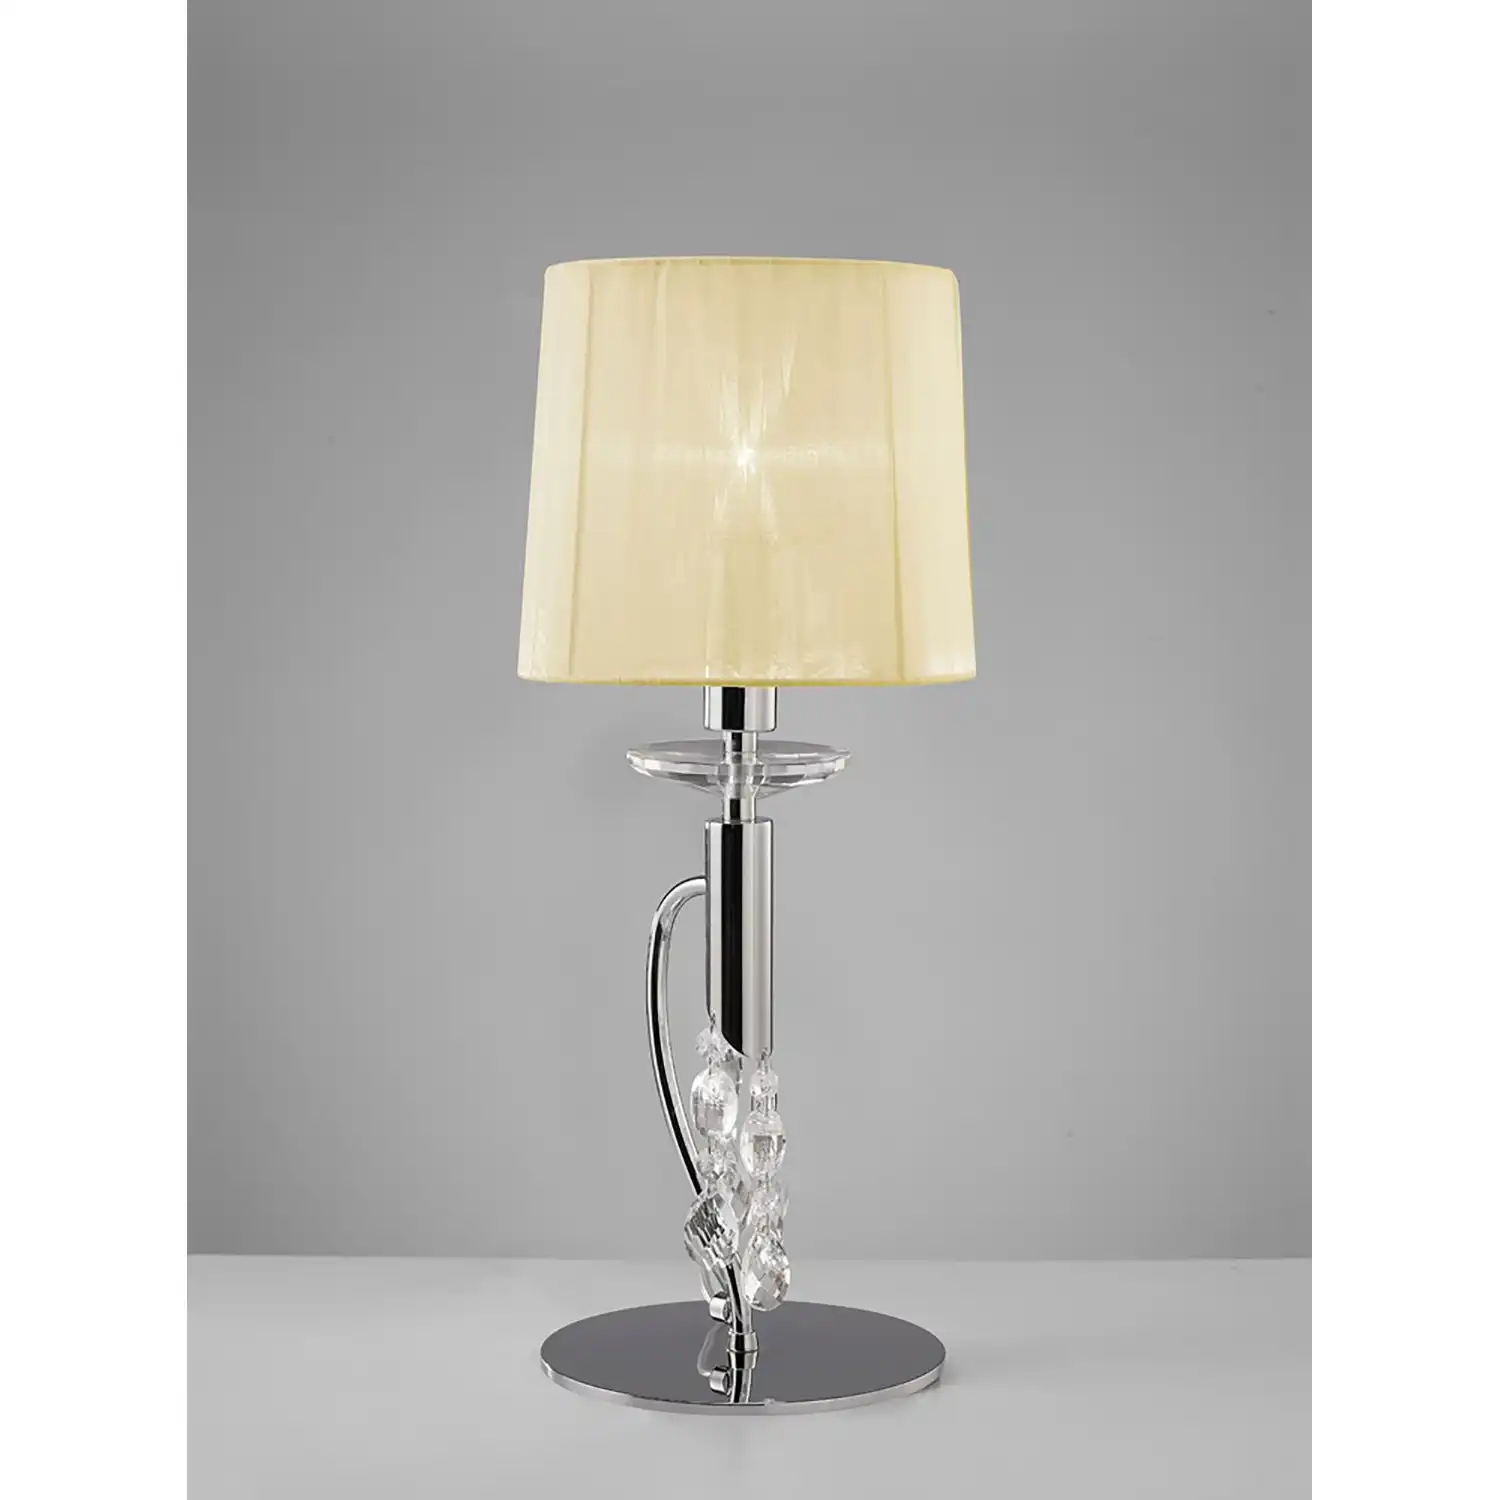 Tiffany Table Lamp 1+1 Light E14+G9, Polished Chrome With Cream Shade And Clear Crystal